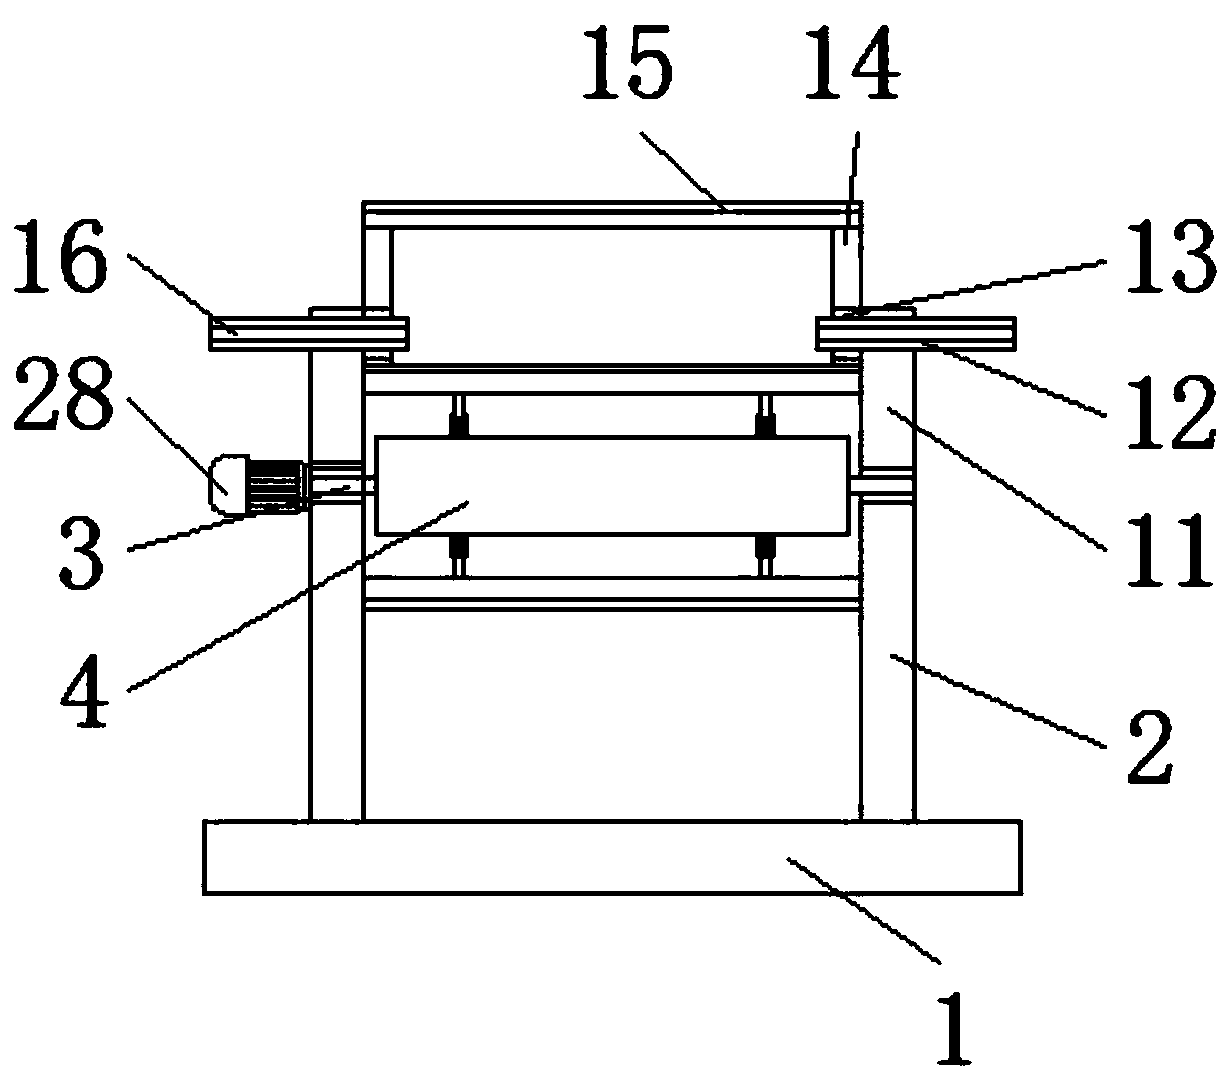 Garment processing winding device preventing cloth from drawing